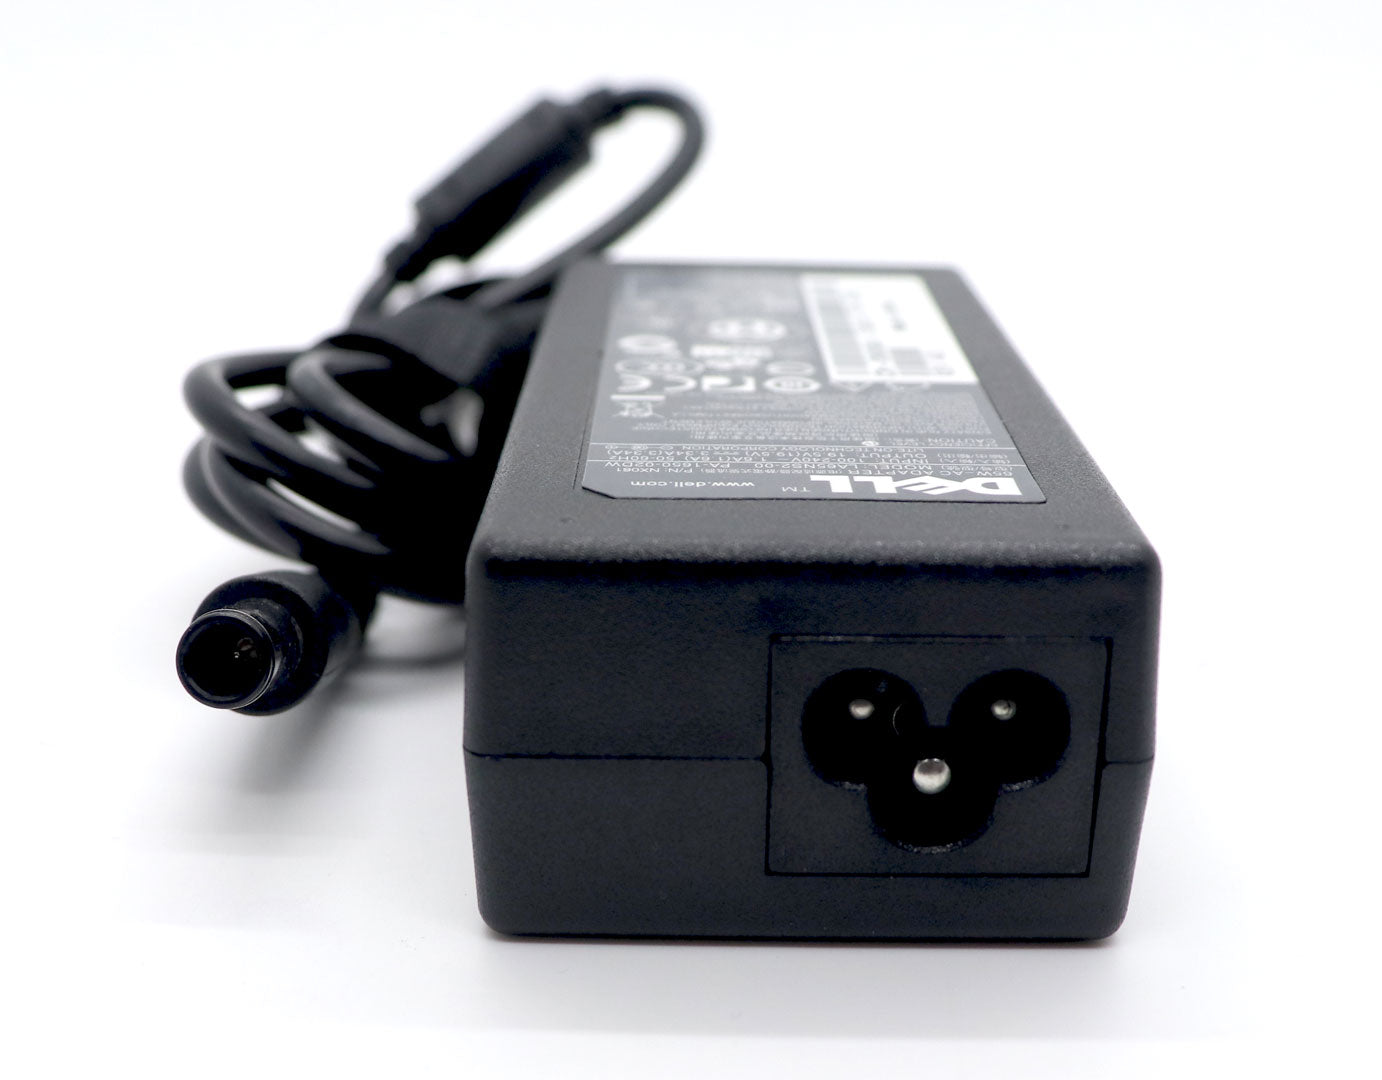 Dell Original 65W 19.5V 3.34A 7.4mm Pin Laptop  Adapter Charger For 1XRN1